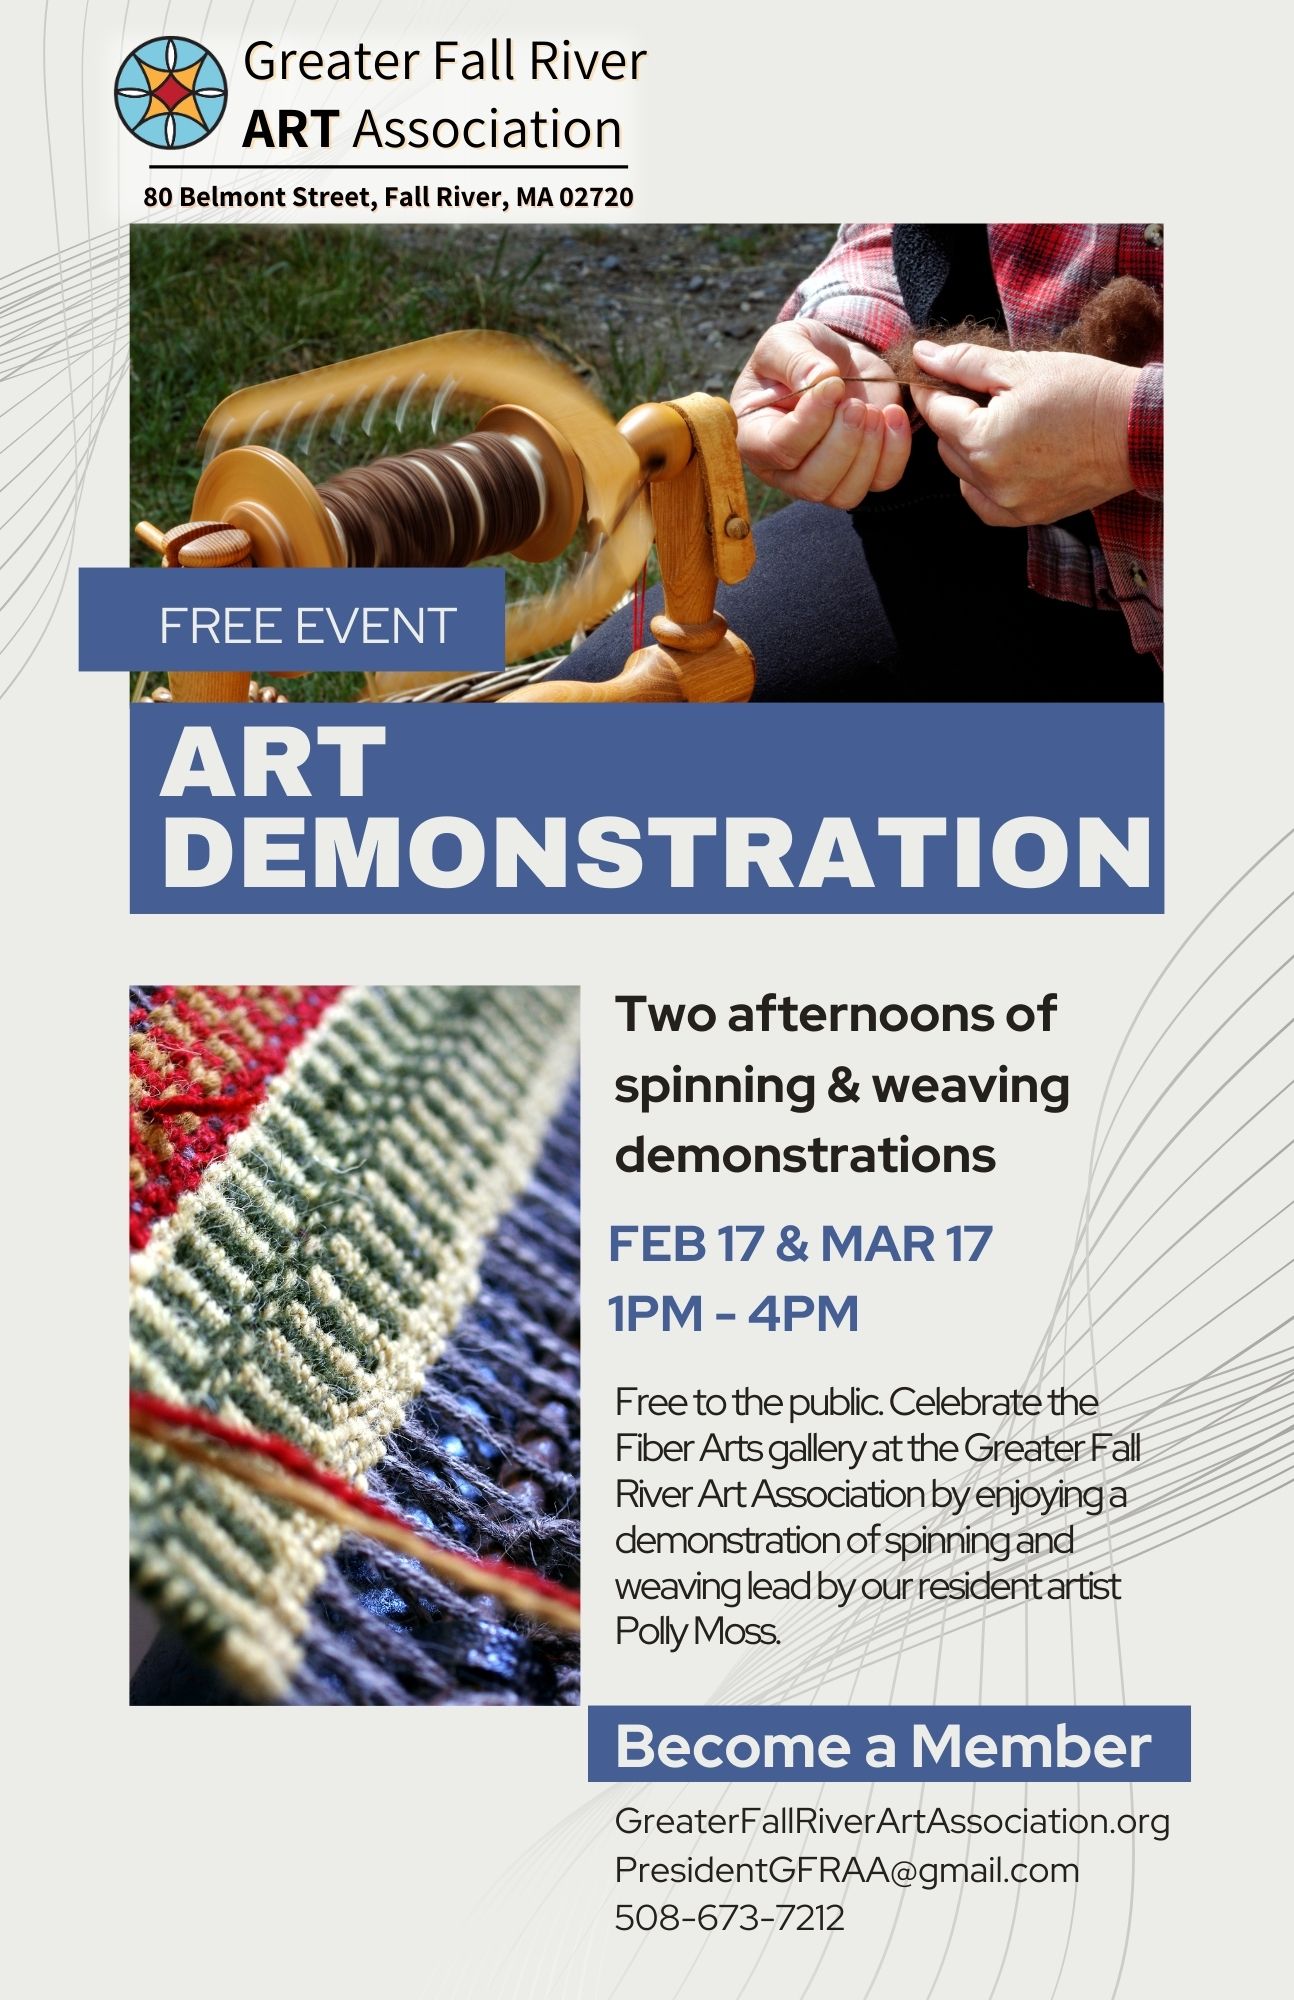 Flyer promoting spinning & weaving demonstration at GFRAA for Feb 17 & Mar 17 at 1-4pm